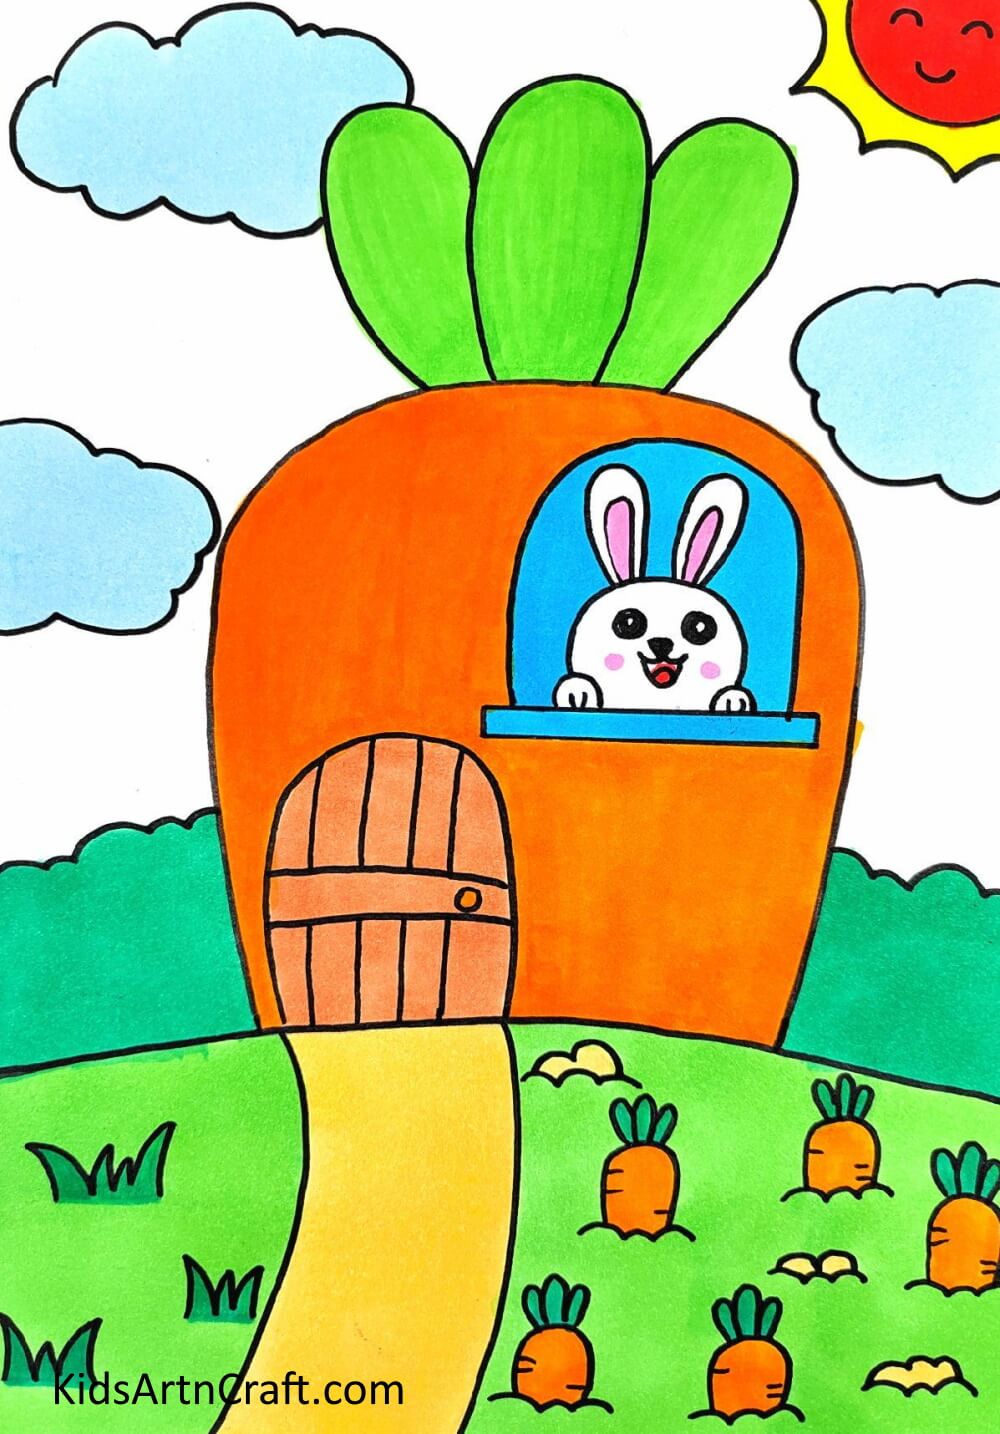 This Is The Final Look Of Our Attractive Bunny House Drawing! - Easy Instructions to Draw a Bunny House